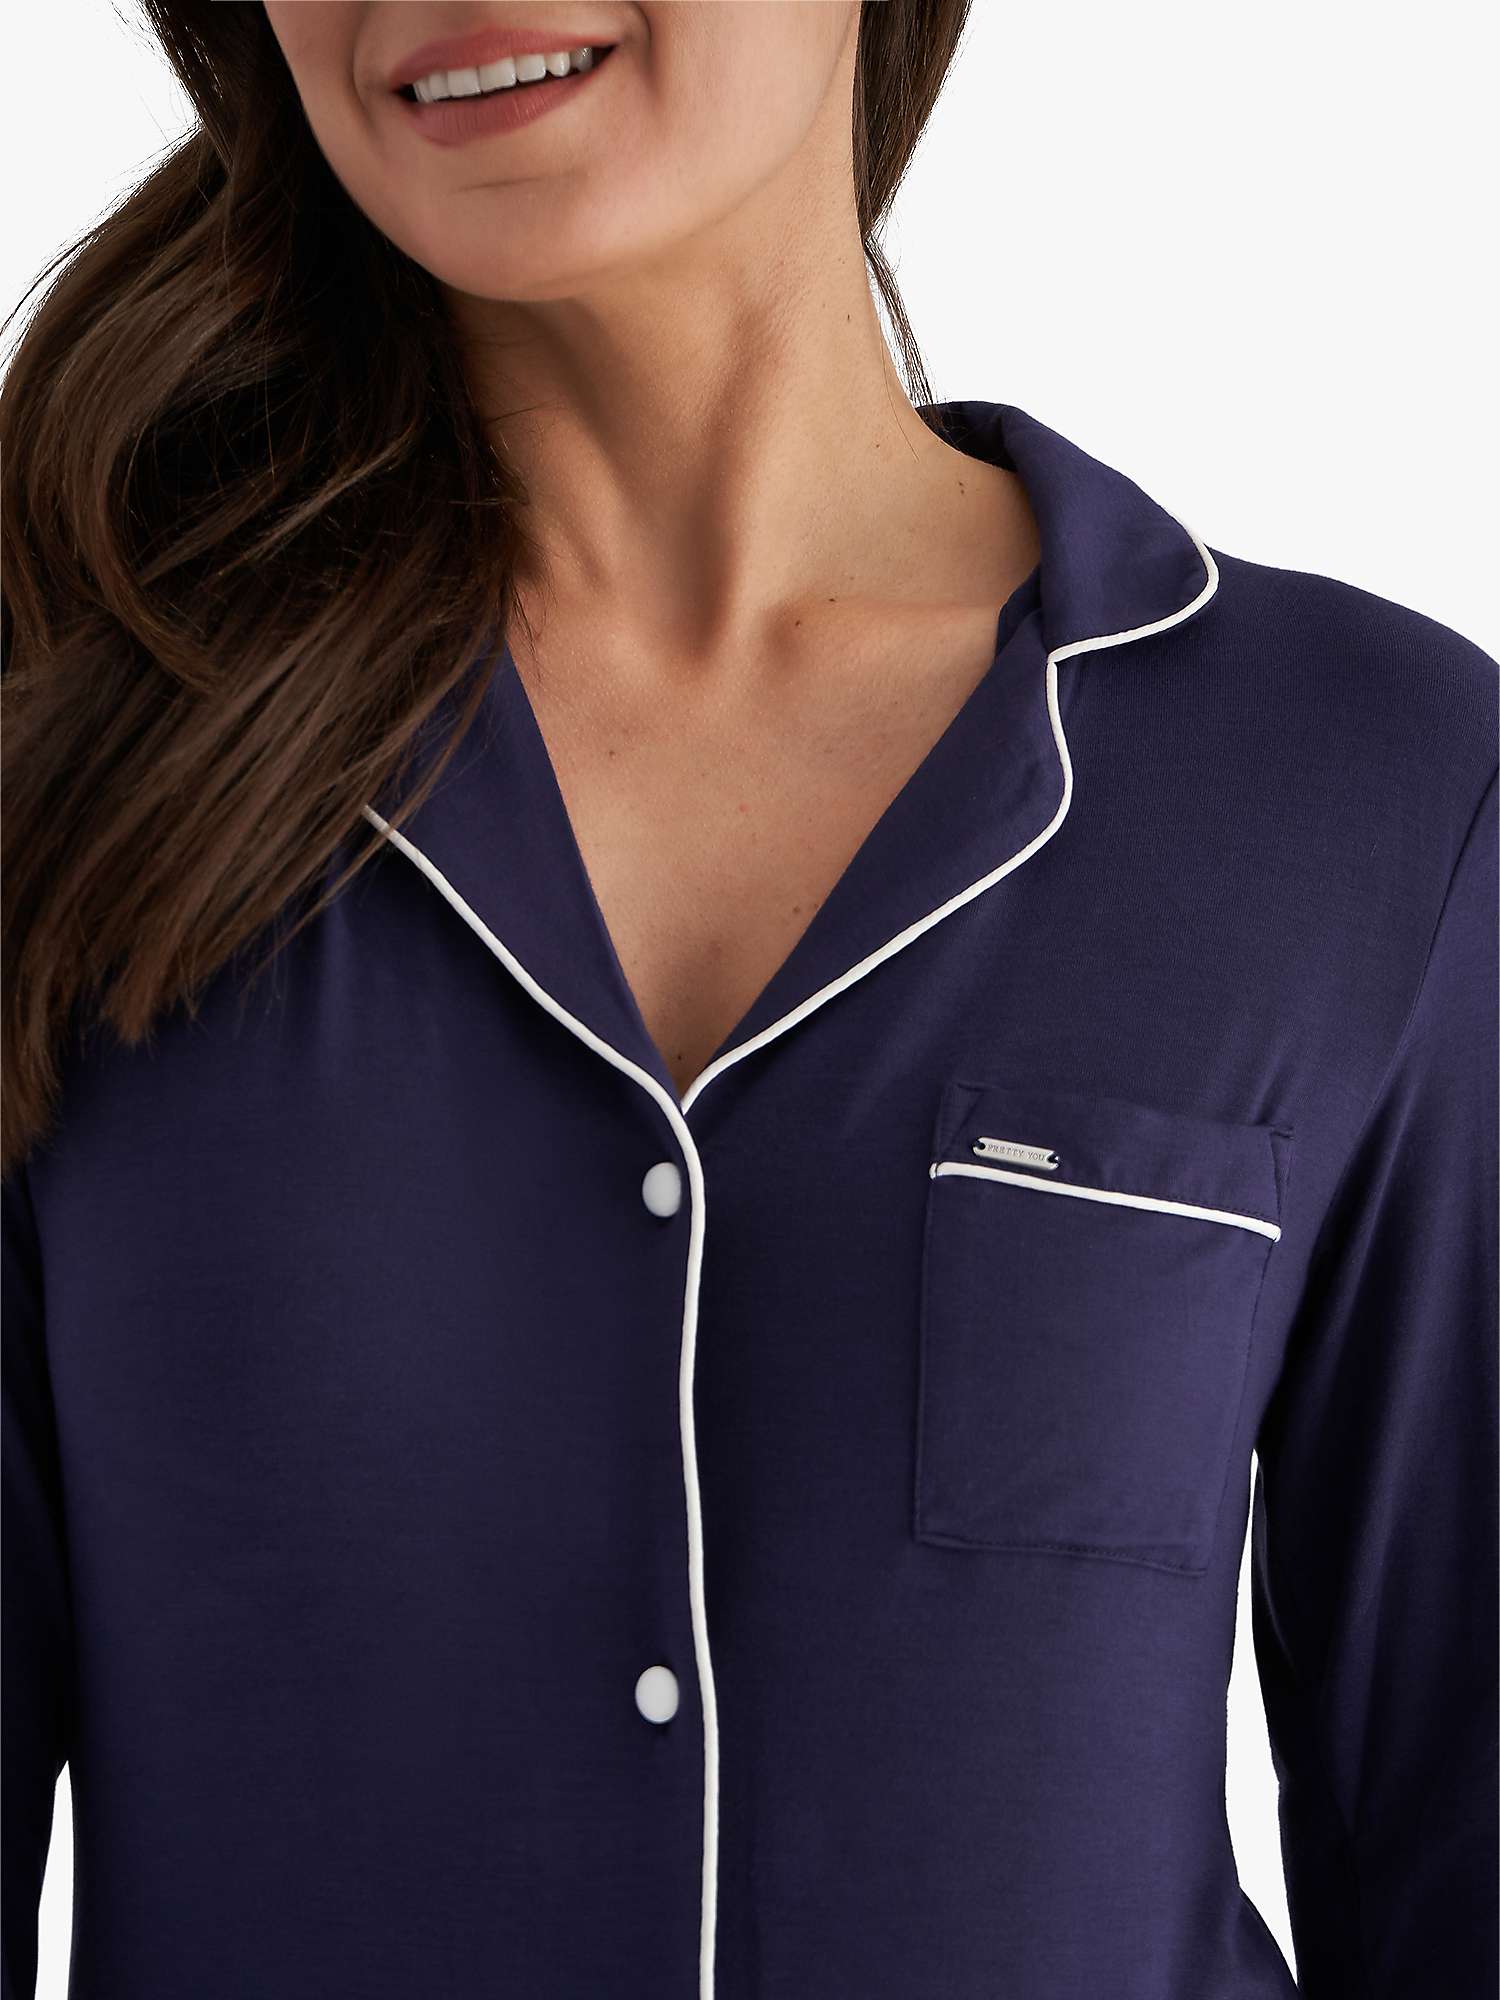 Buy Pretty You London Piping Trim Bamboo Nightshirt Online at johnlewis.com